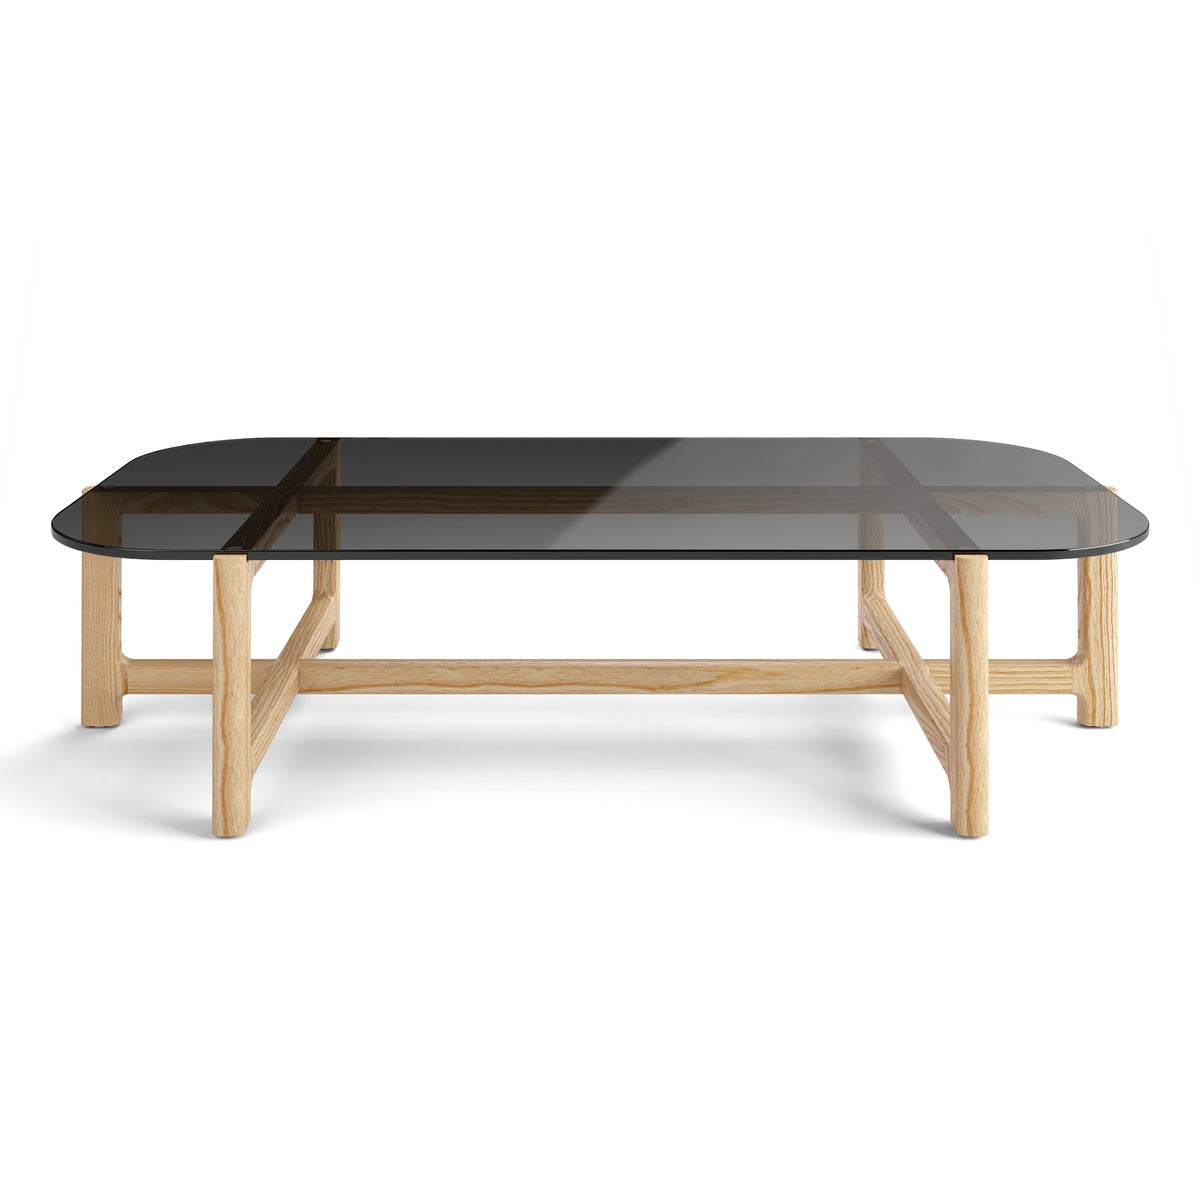 Quarry Coffee Table - Rectangle